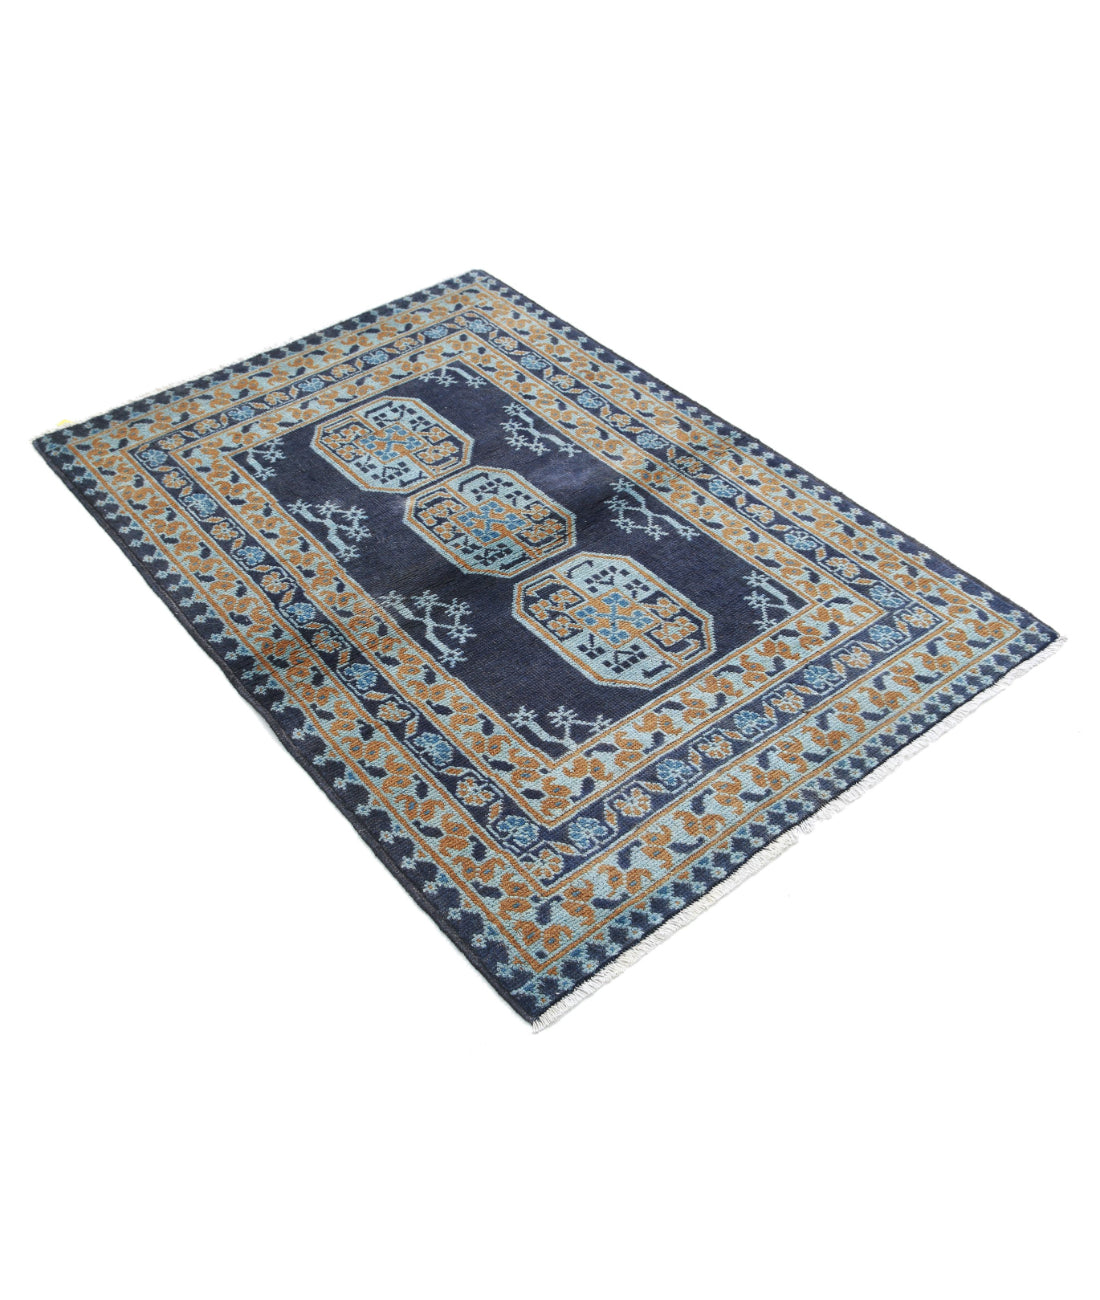 Revival 3'4'' X 4'9'' Hand-Knotted Wool Rug 3'4'' x 4'9'' (100 X 143) / Blue / Ivory